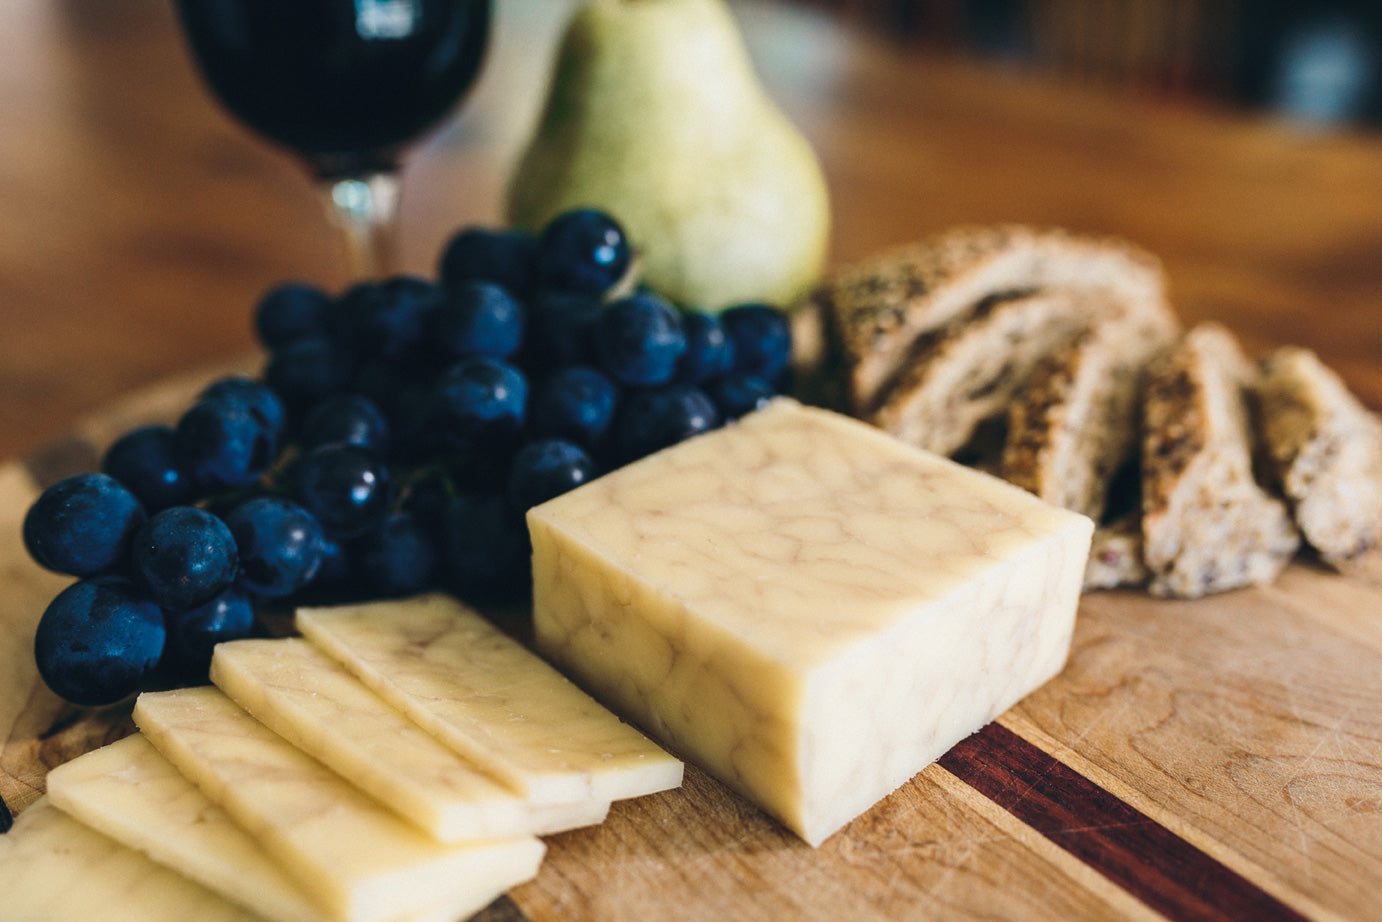 Tipsy Jill cheese is displayed on a wooden board with fresh grapes, sliced bread, and a glass of red wine. The cheese itself has a soft marbling from the addition of red wine.